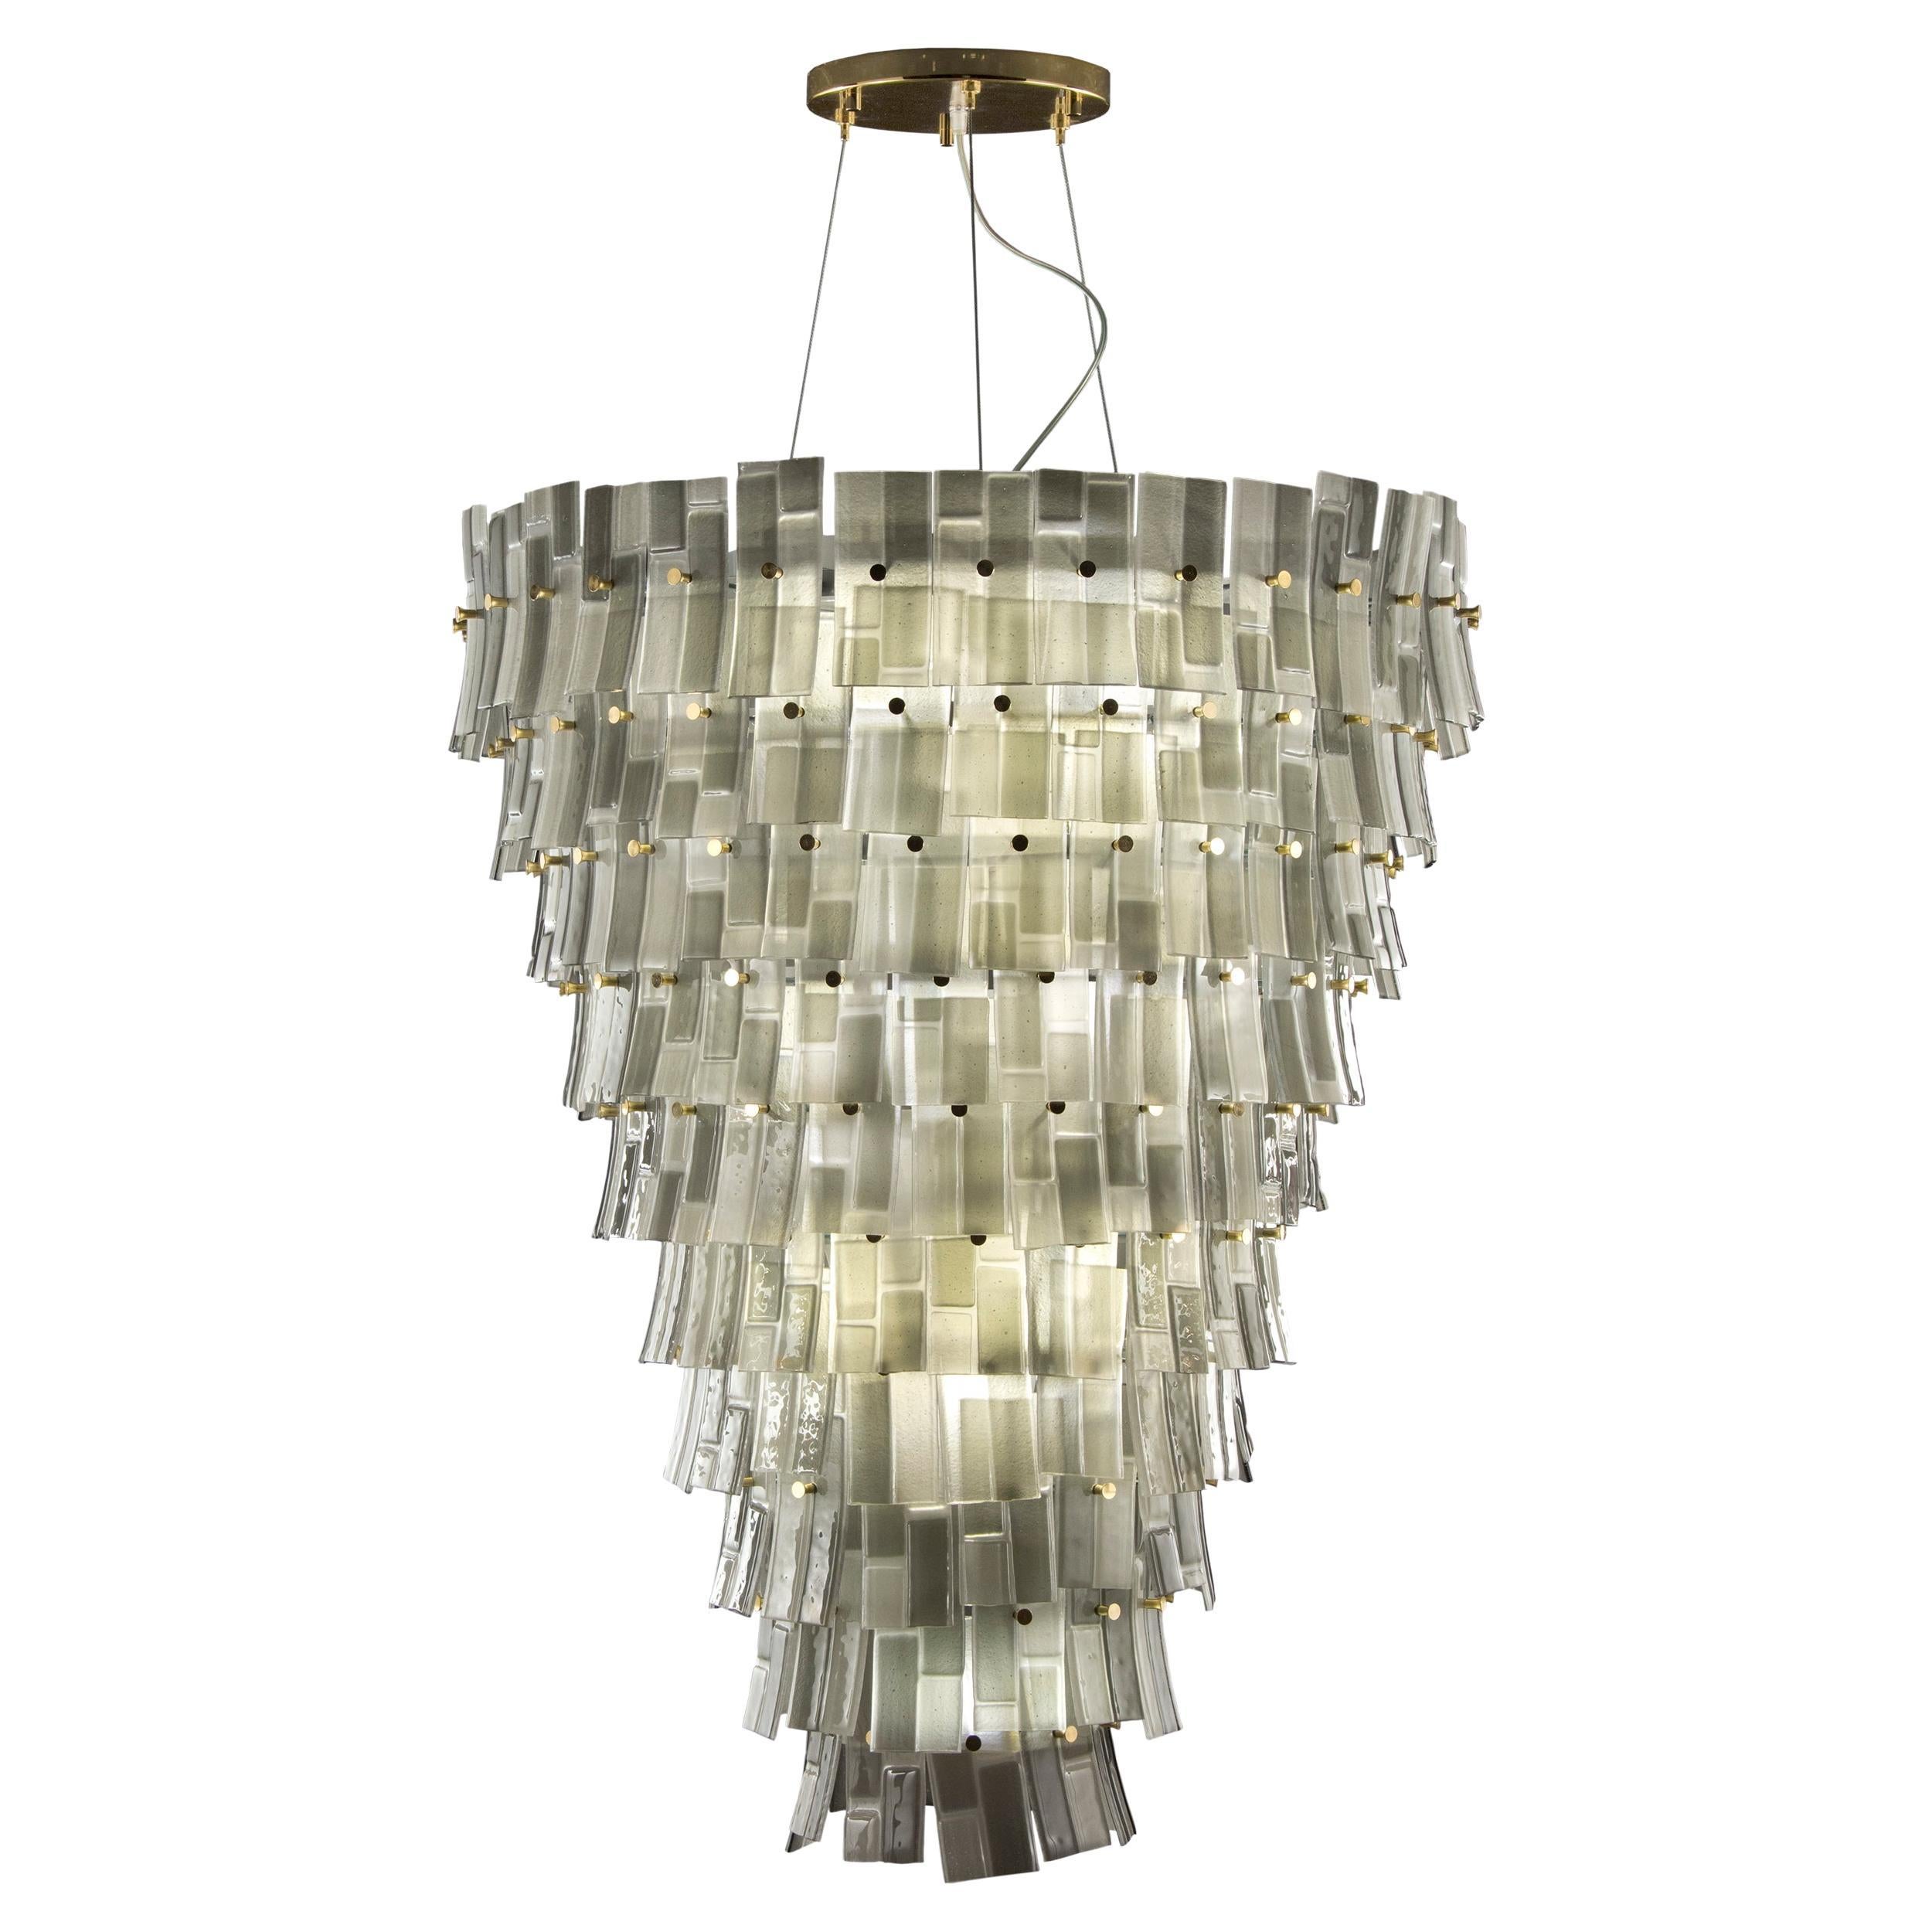 Big Suspension Lamp Grey Murano Glass Listels, Gold Fixture by Multiforme For Sale